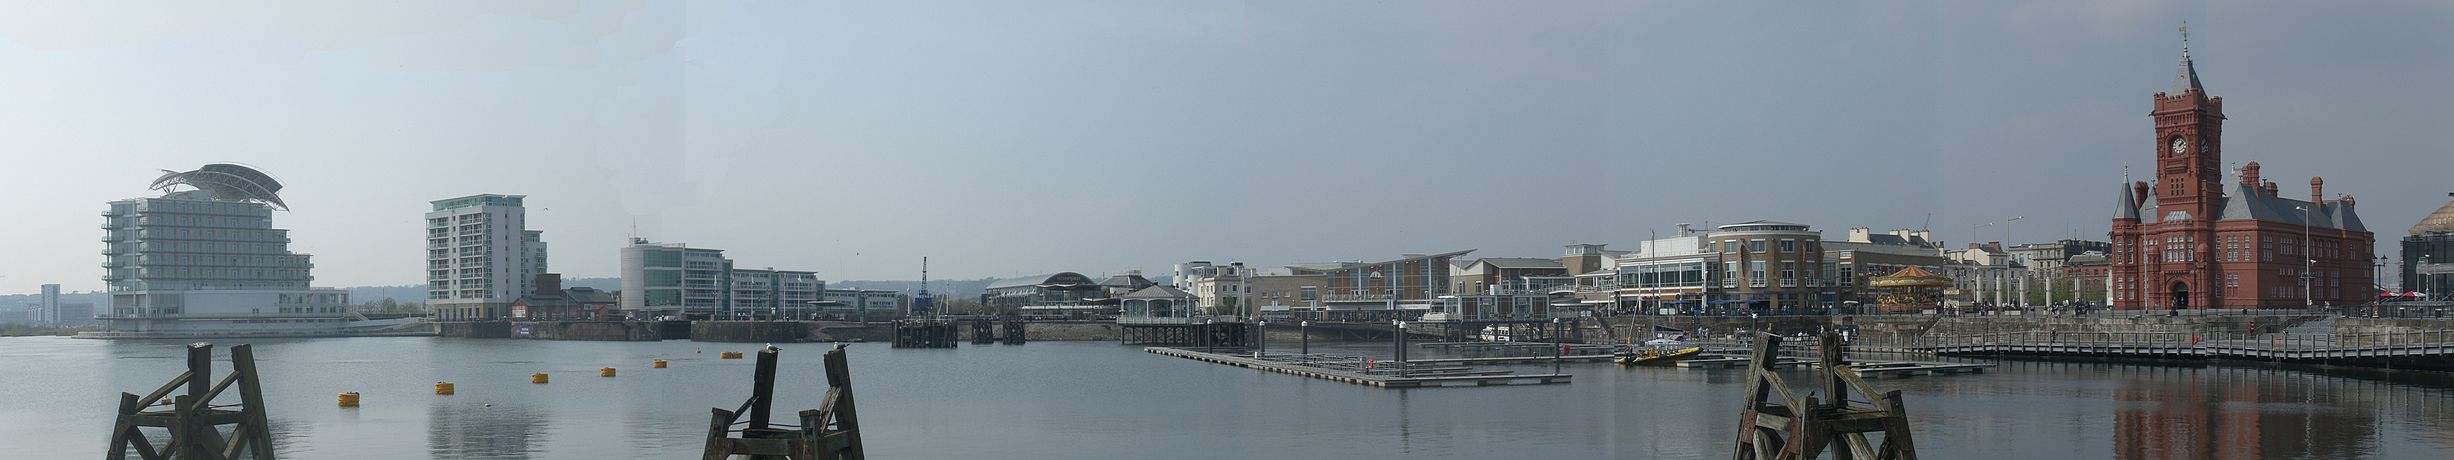 Panorama of the Cardiff Bay in March 2008